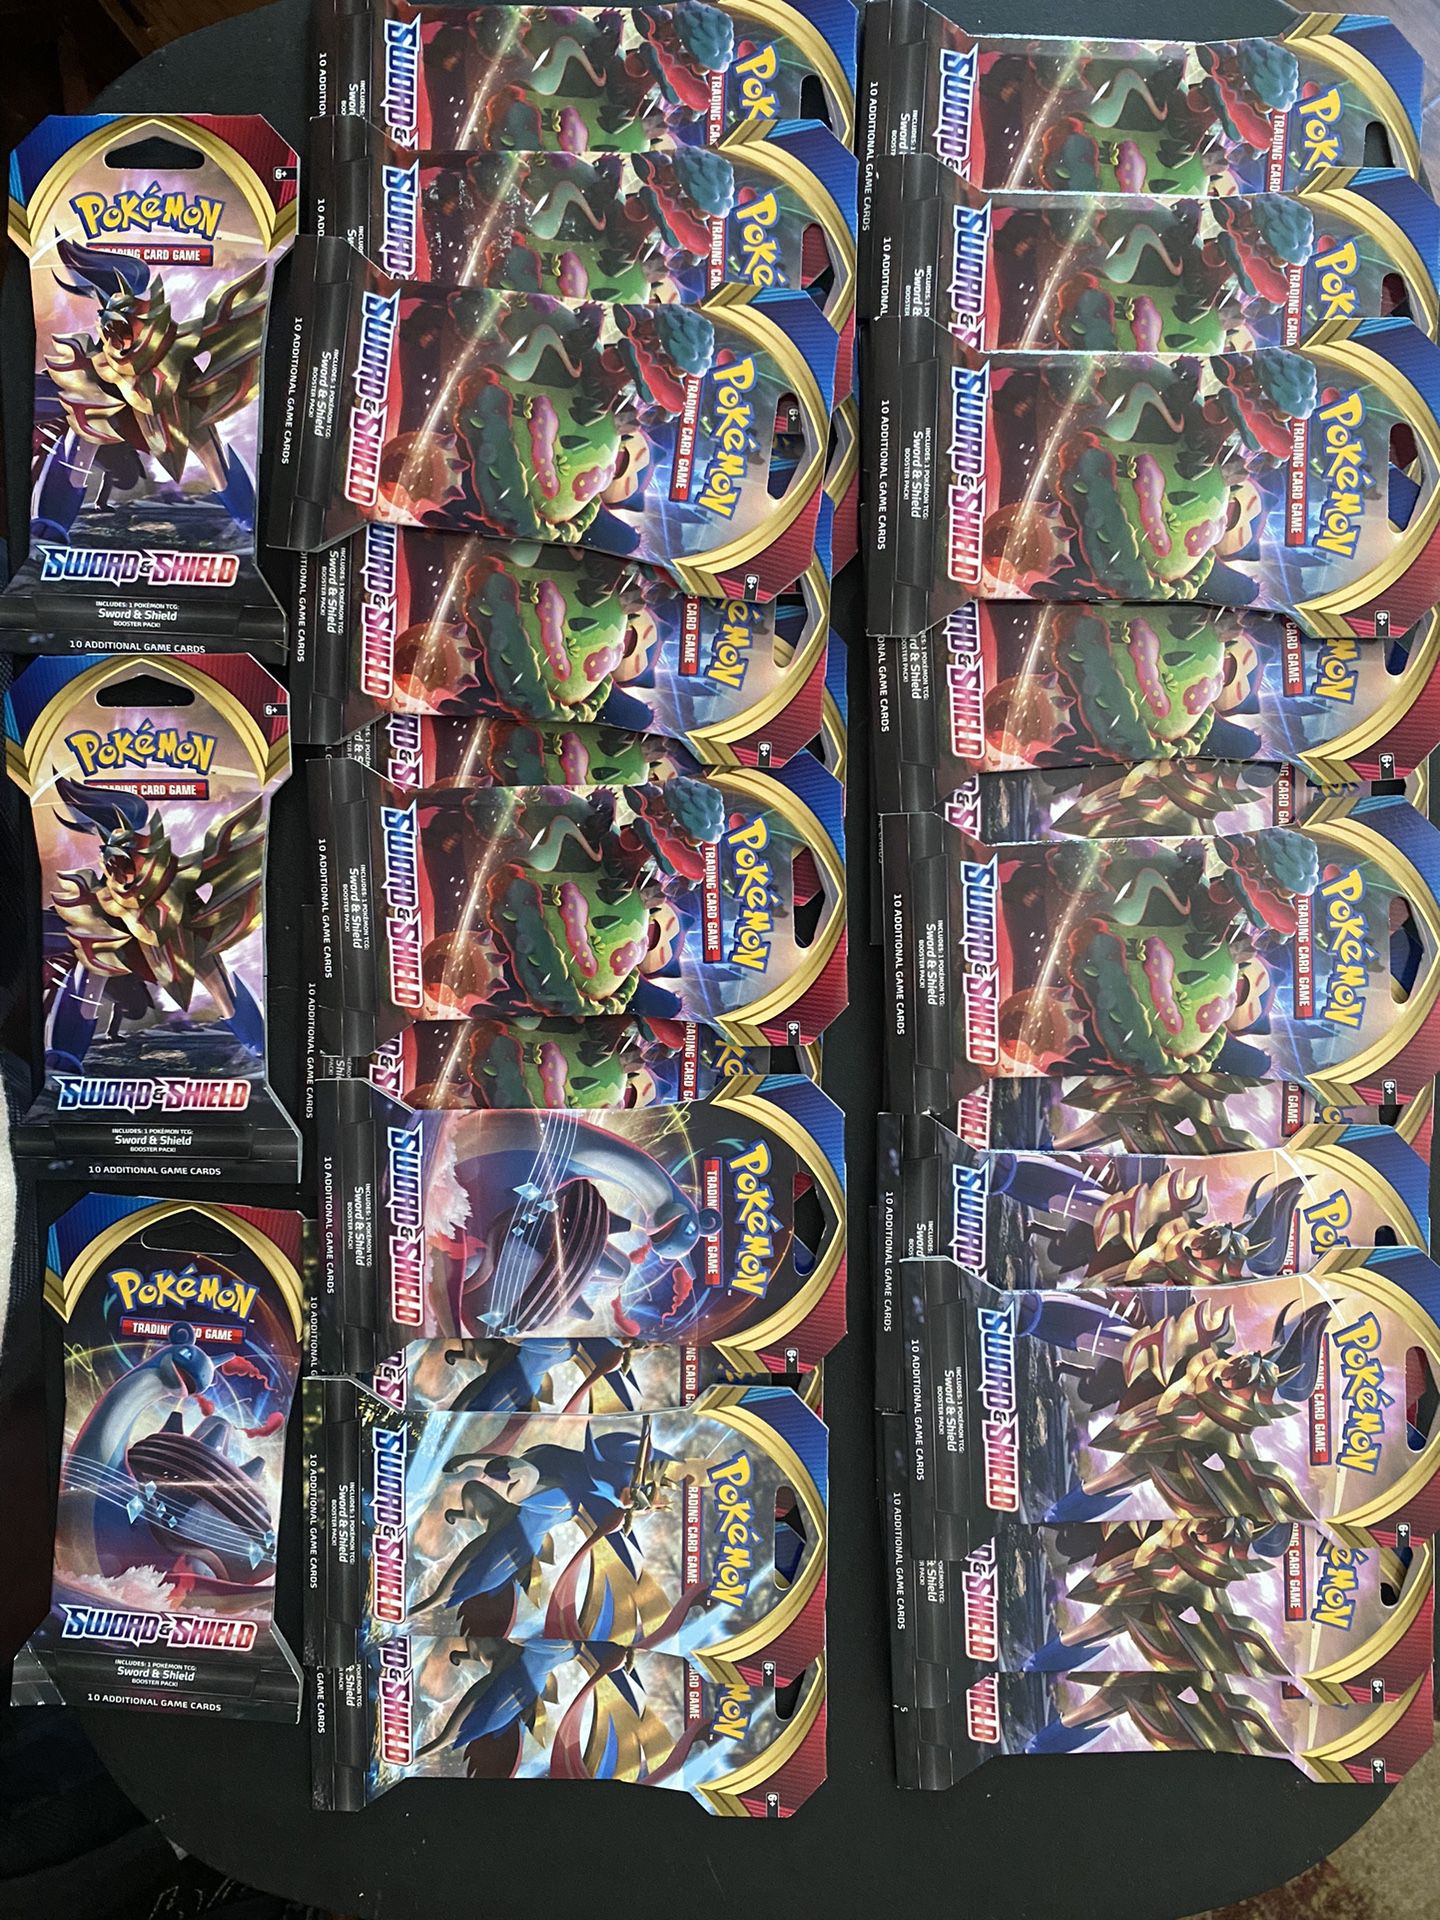 28 Pokémon Sword And Shield Booster Packs *Mint Condition Off The Shelf*